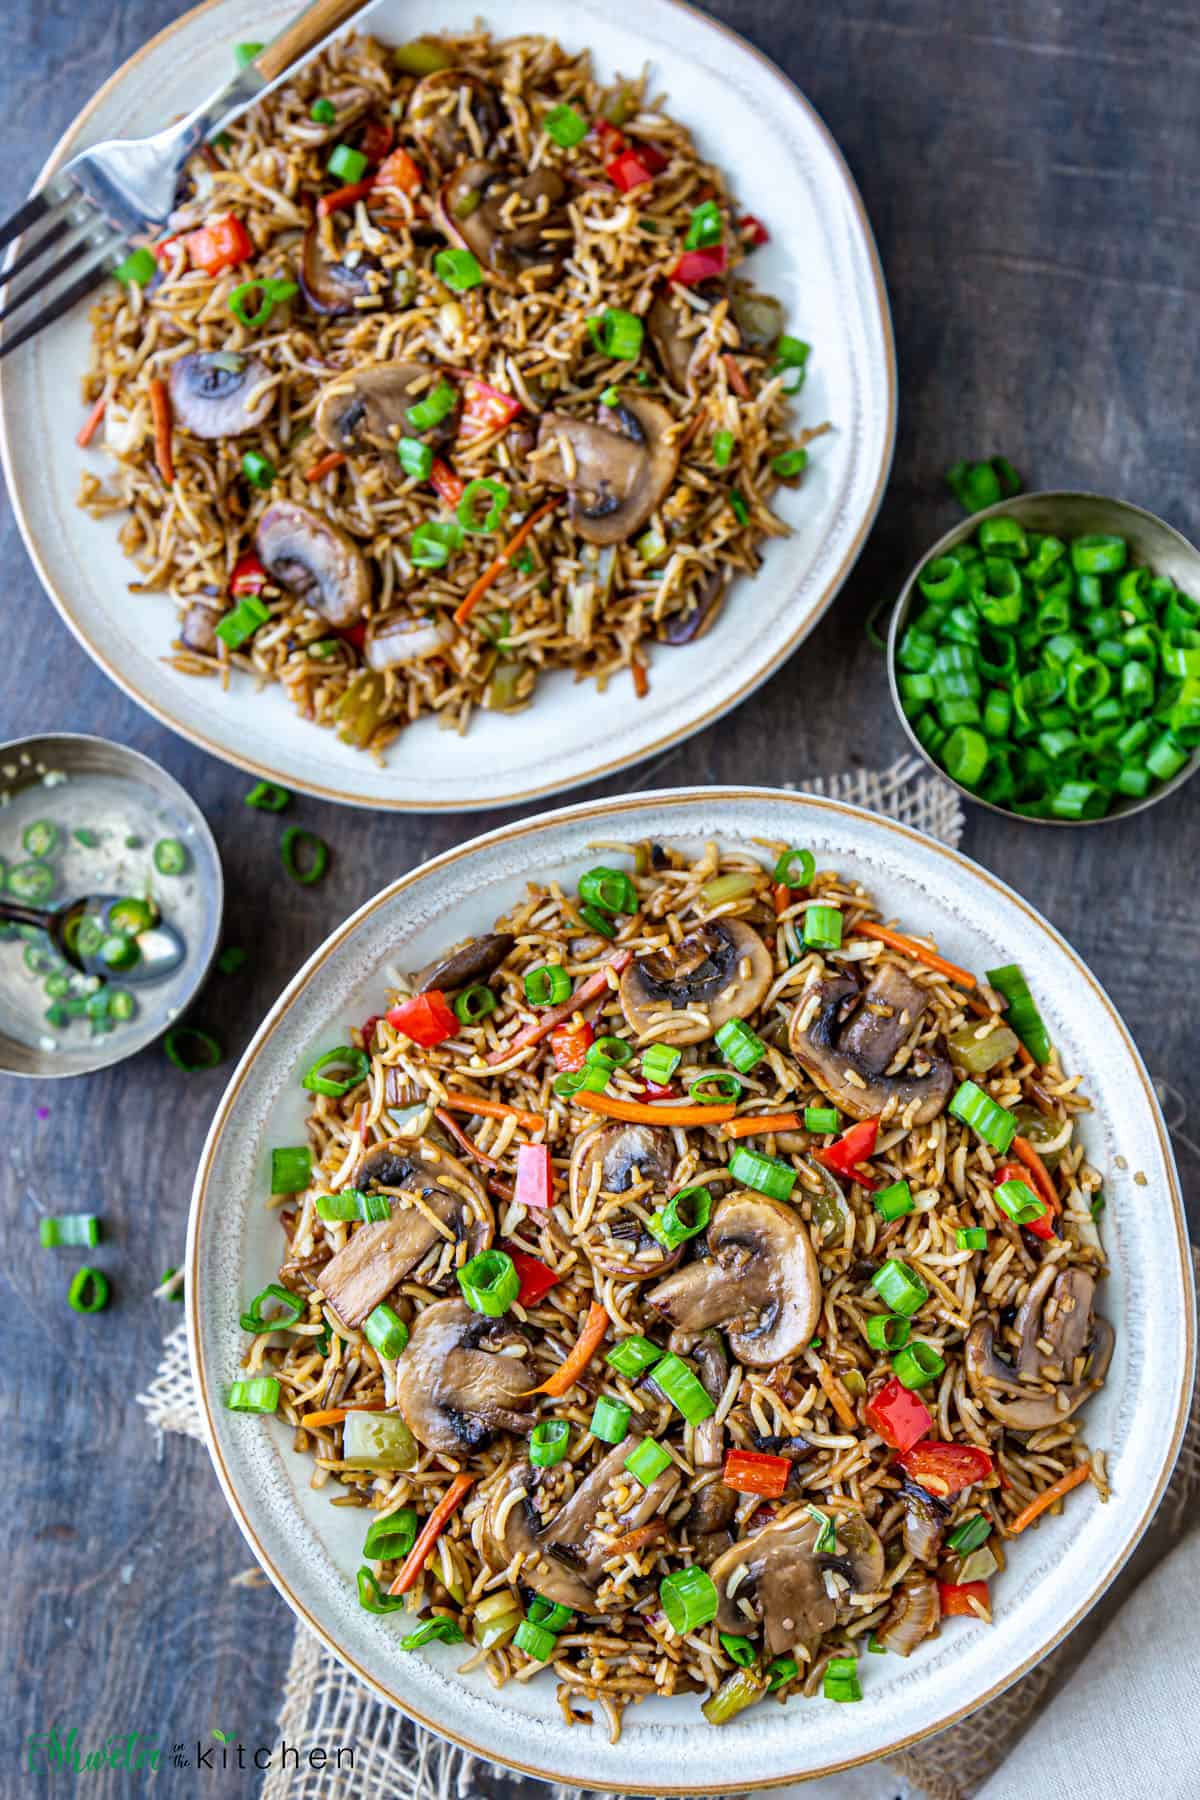 Two plates of mushroom fried rice with spring oniongreens and chilli vinegar on side